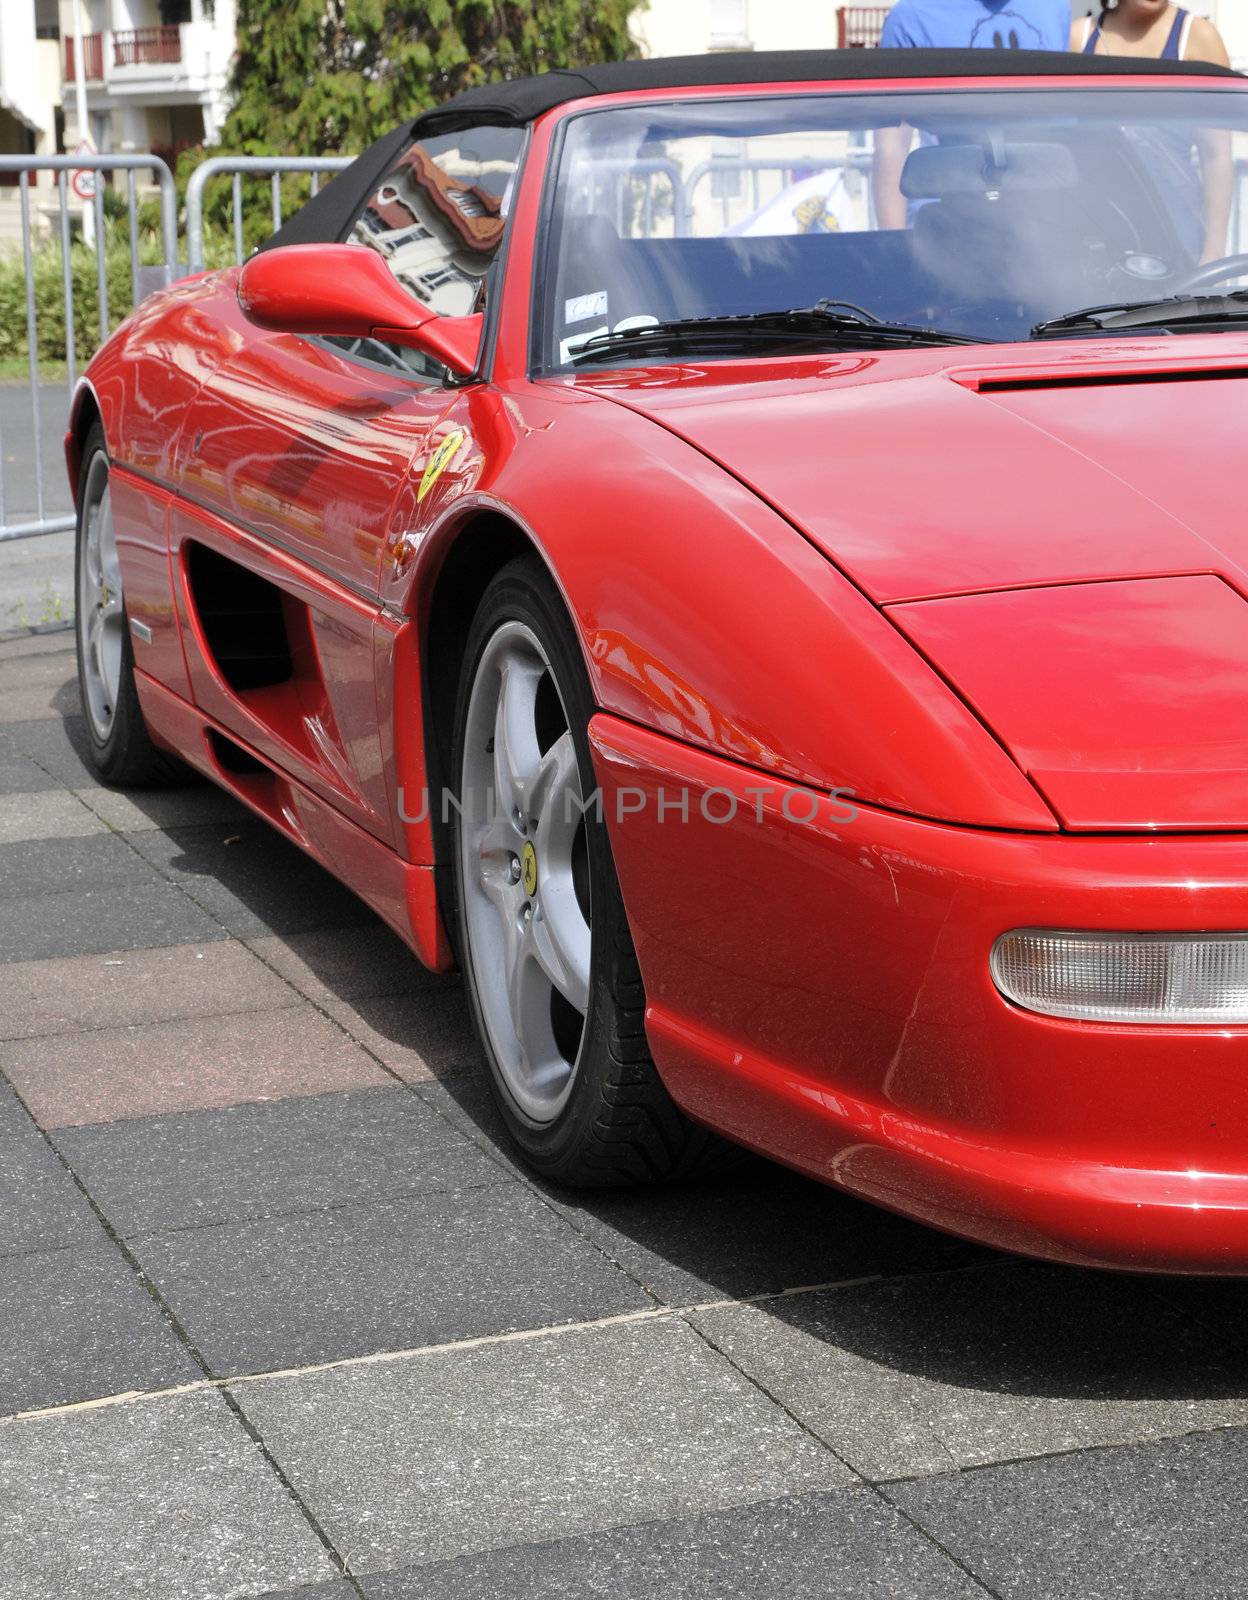 Right view of a F355 Ferrari by shkyo30